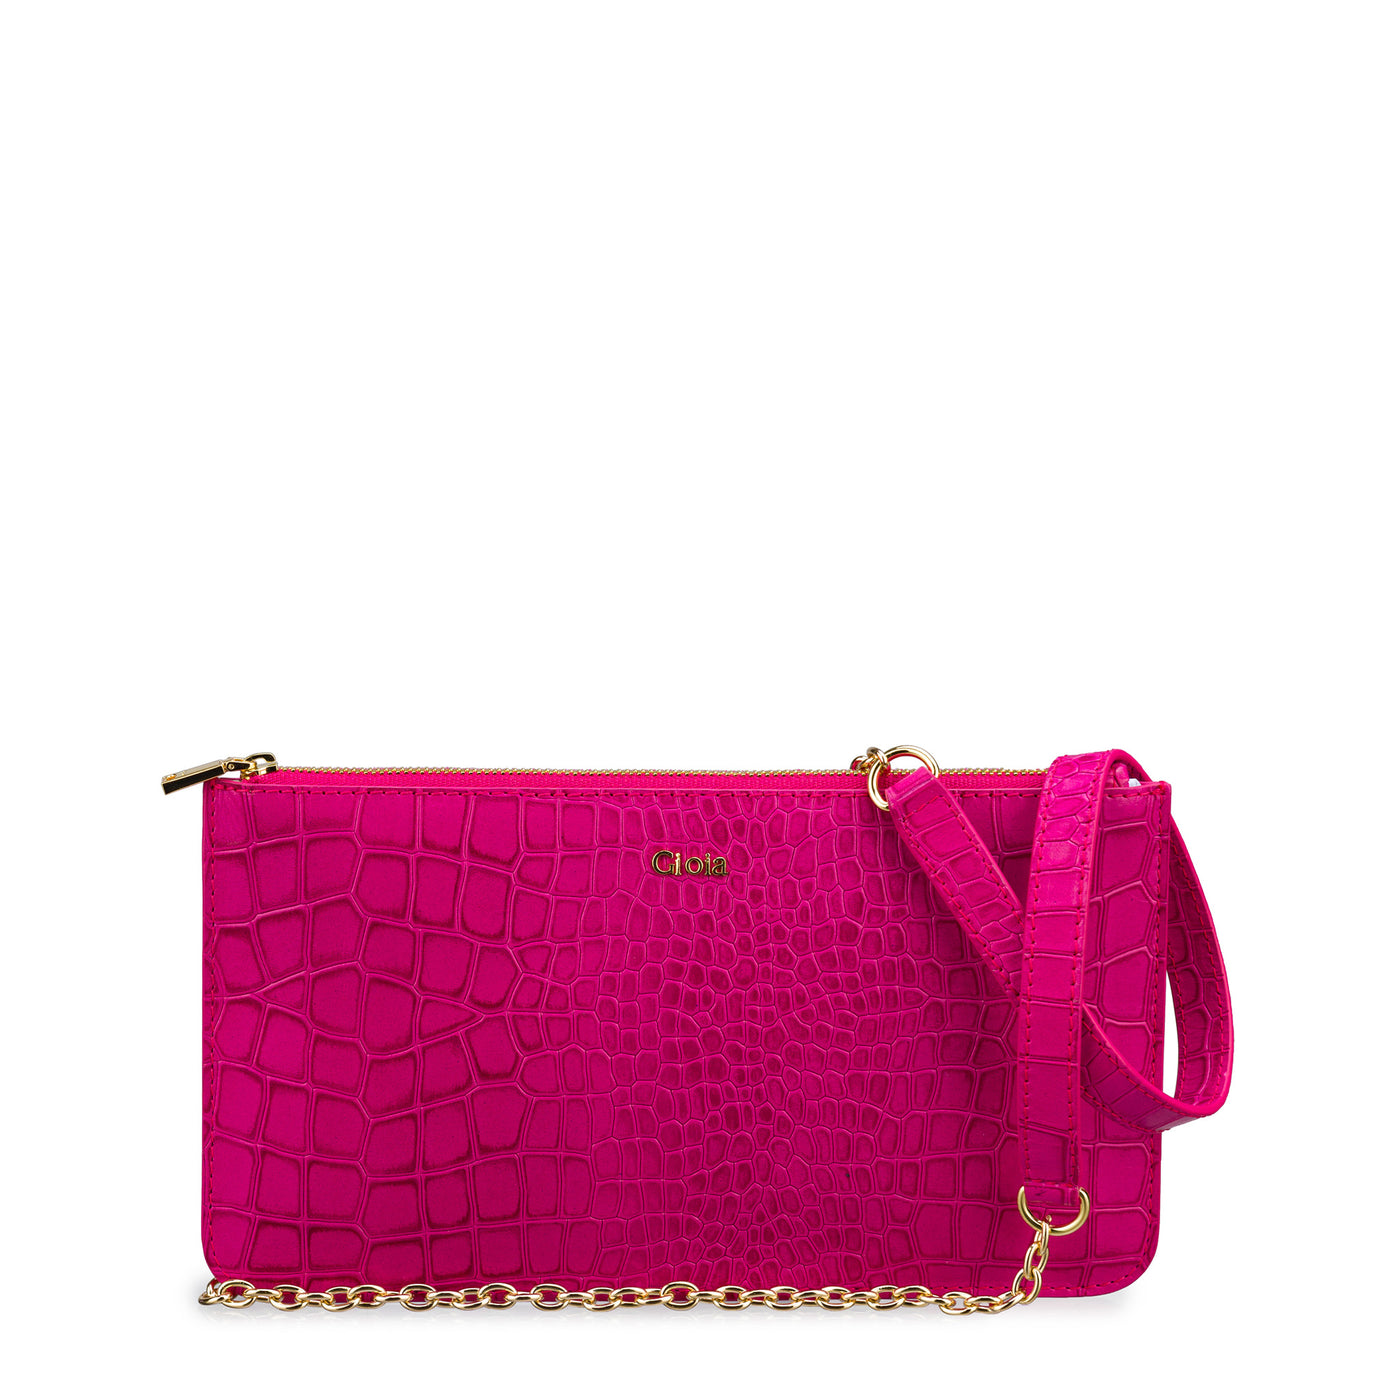 Classic Sinamay Blossom Pink Clutch Bag For Weddings